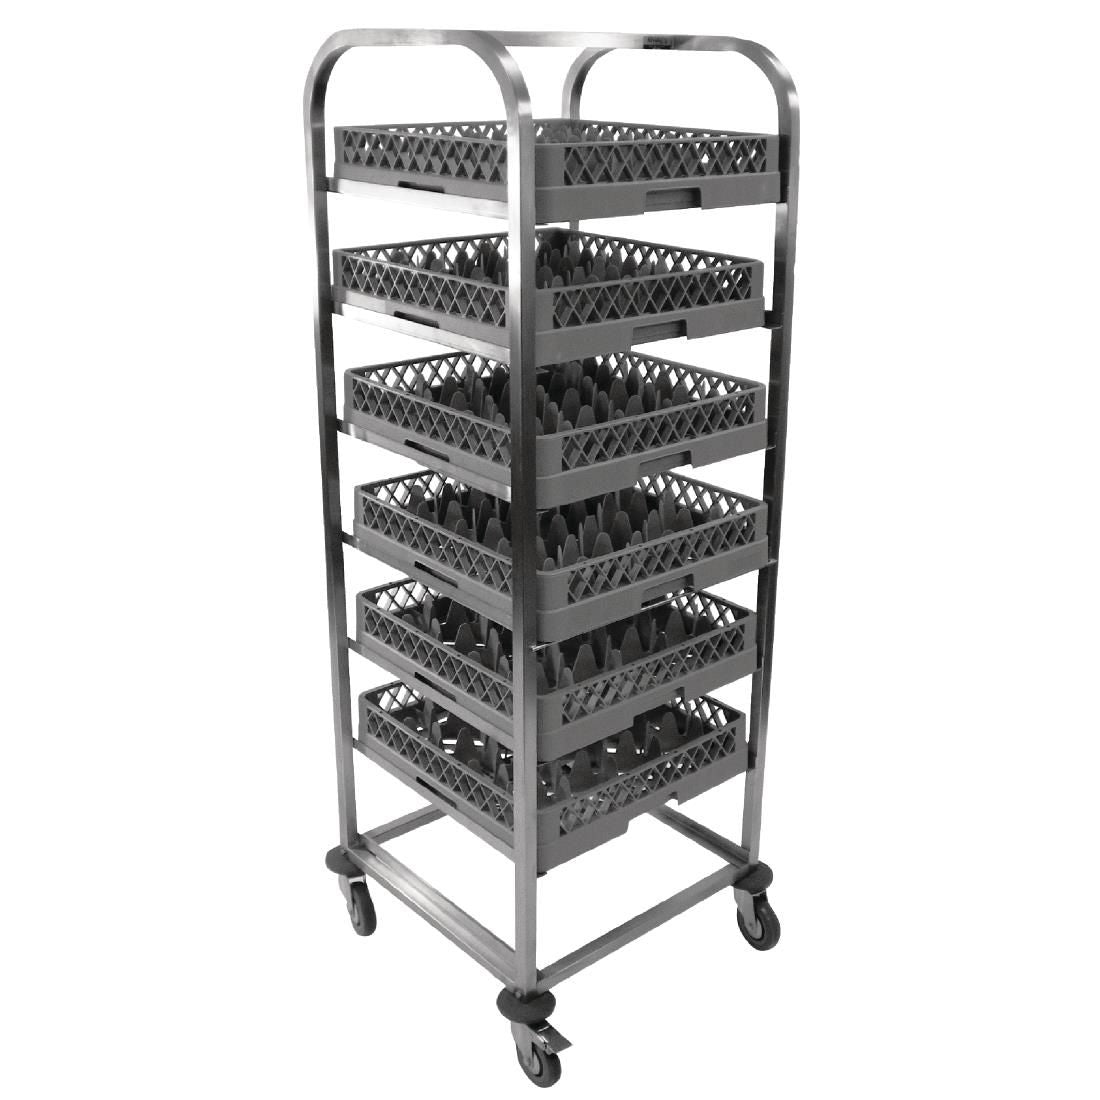 DN595 Craven Stainless Steel Dishwasher Basket Trolley JD Catering Equipment Solutions Ltd